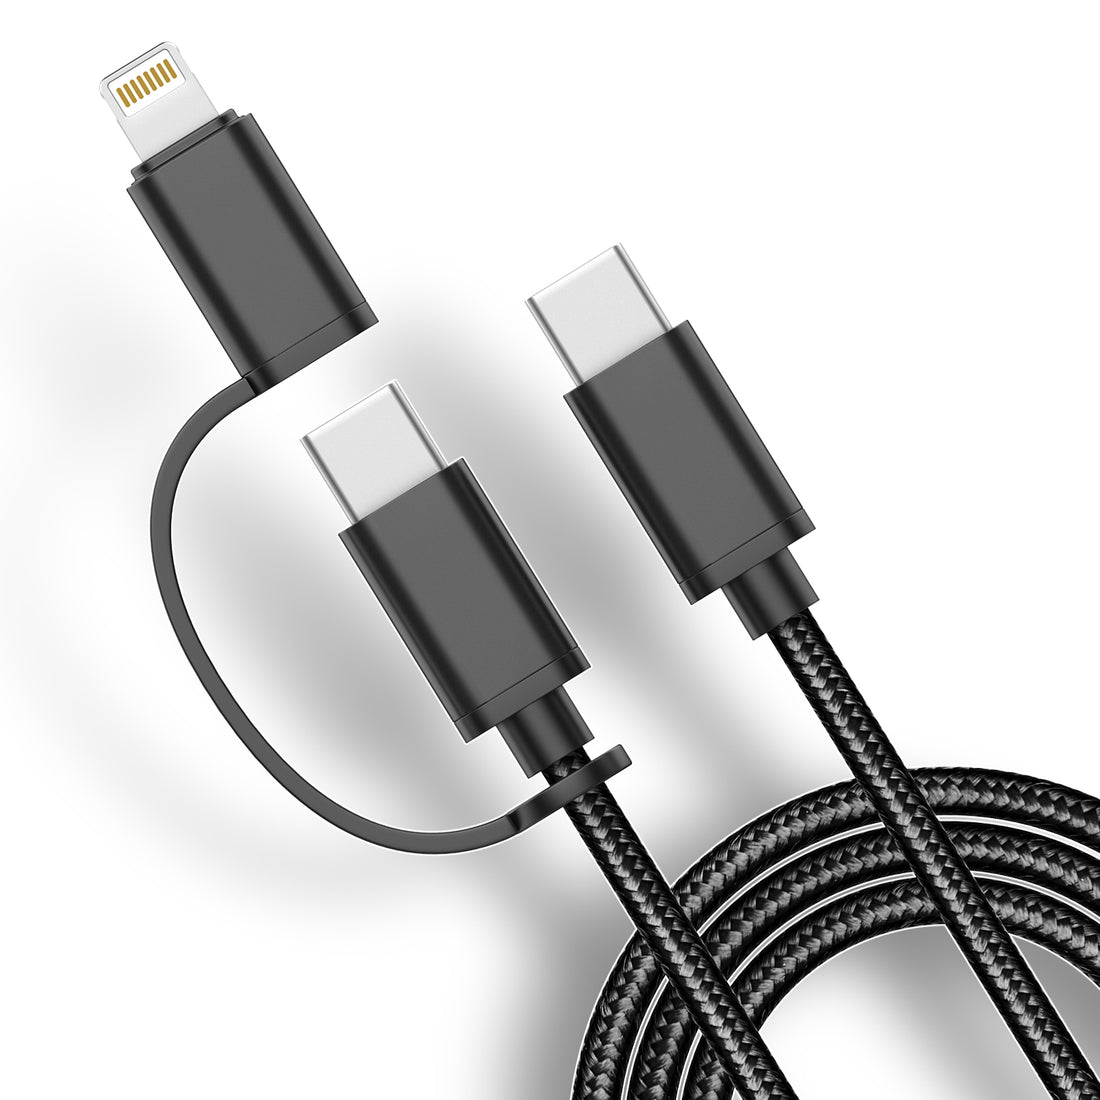 Charging Bundle - 2-in-1 Plug with 2-in-1 Charging Cable